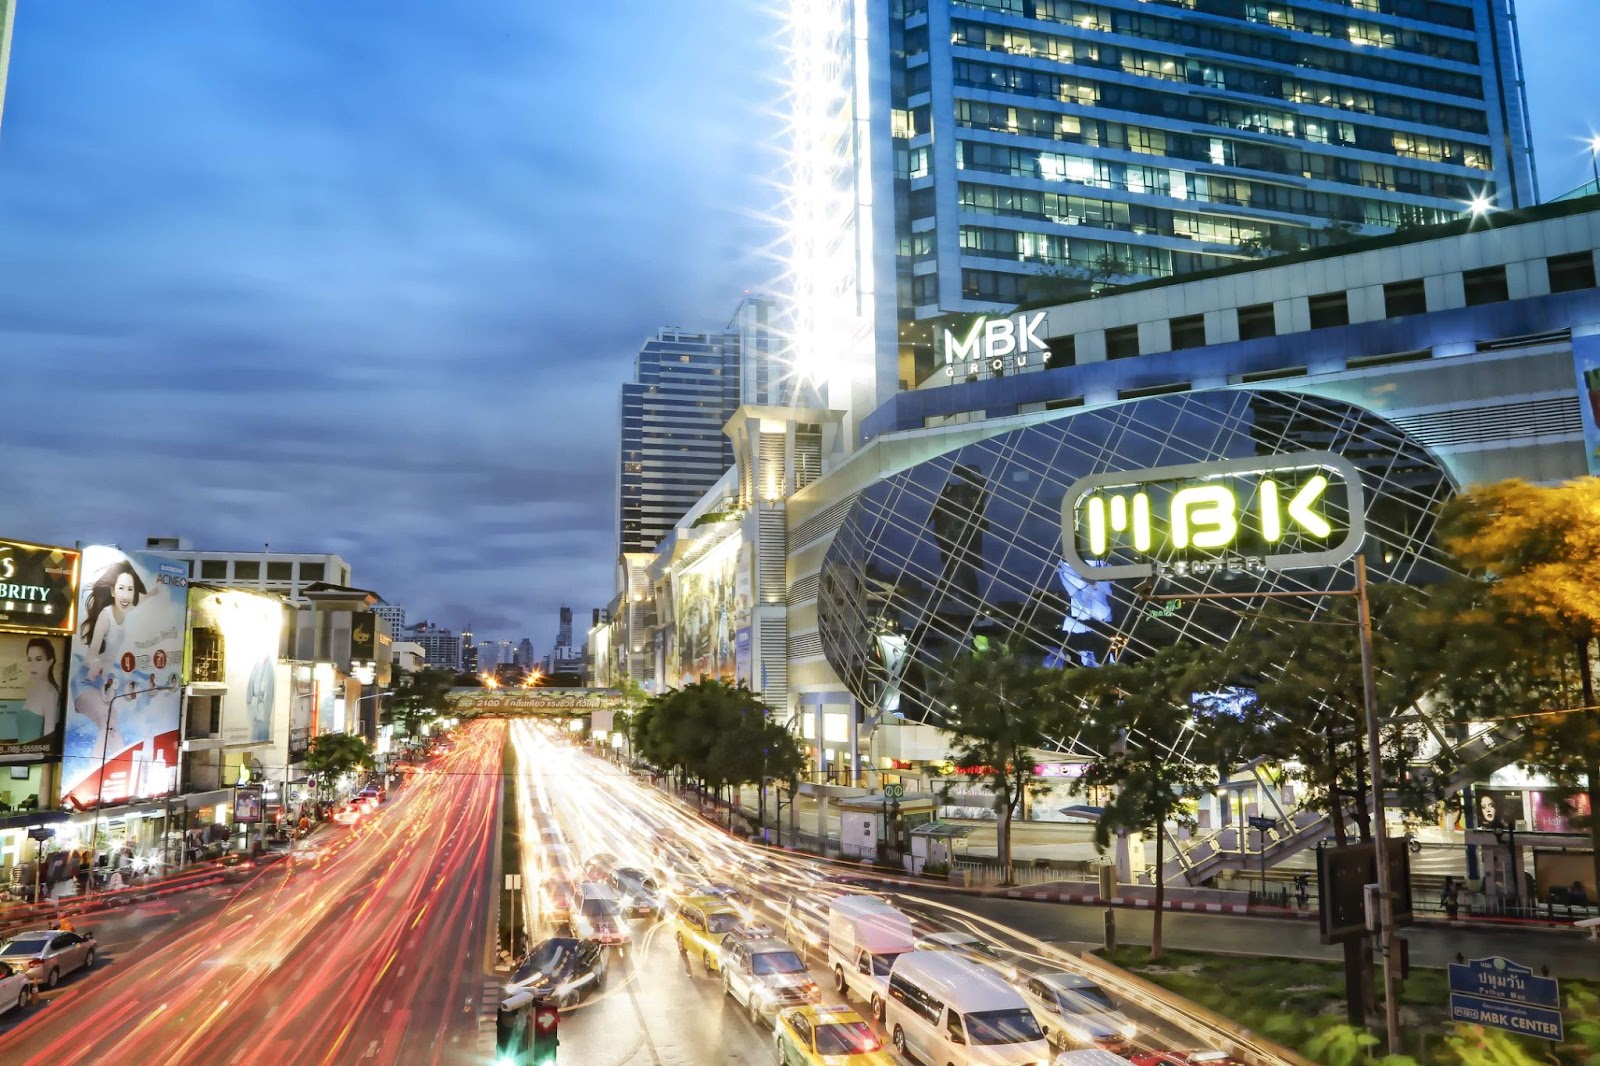 MBK shopping complex, 8 floors, connected to skybridge, 